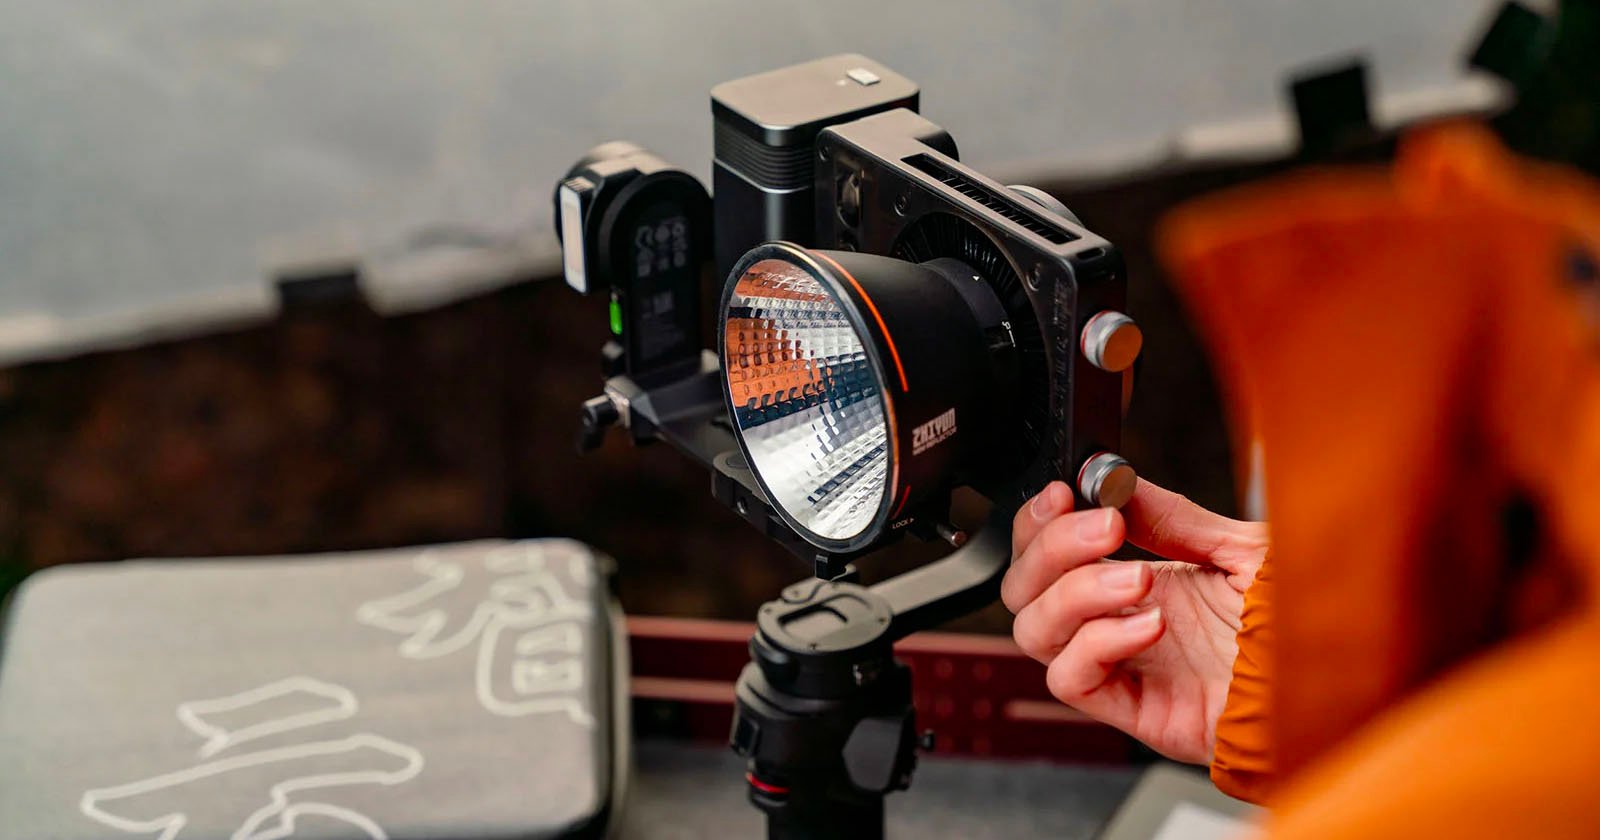 Zhiyun's New Molus G60 and X100 are Super Compact LEDs for